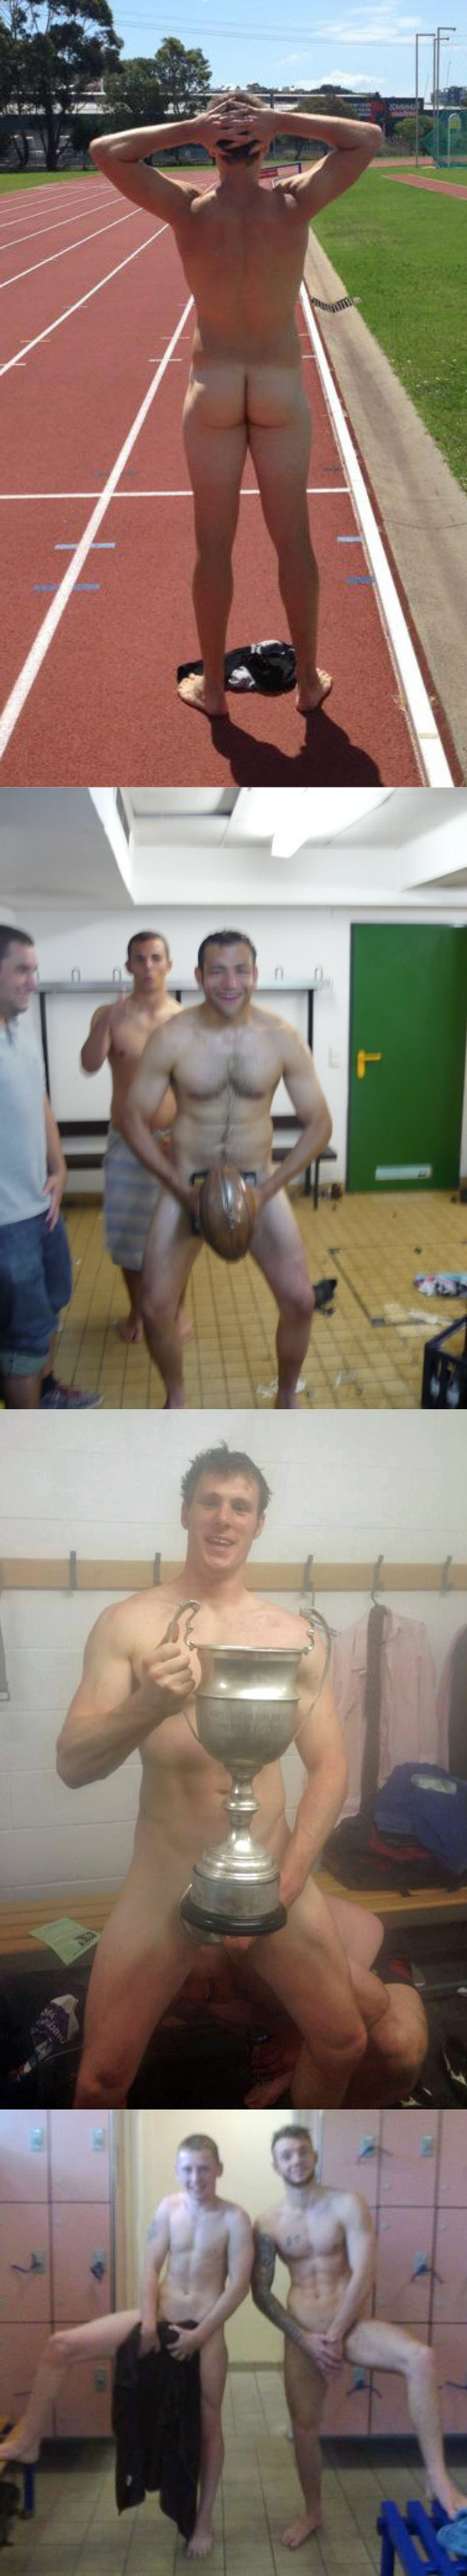 naked rugby players celebrating